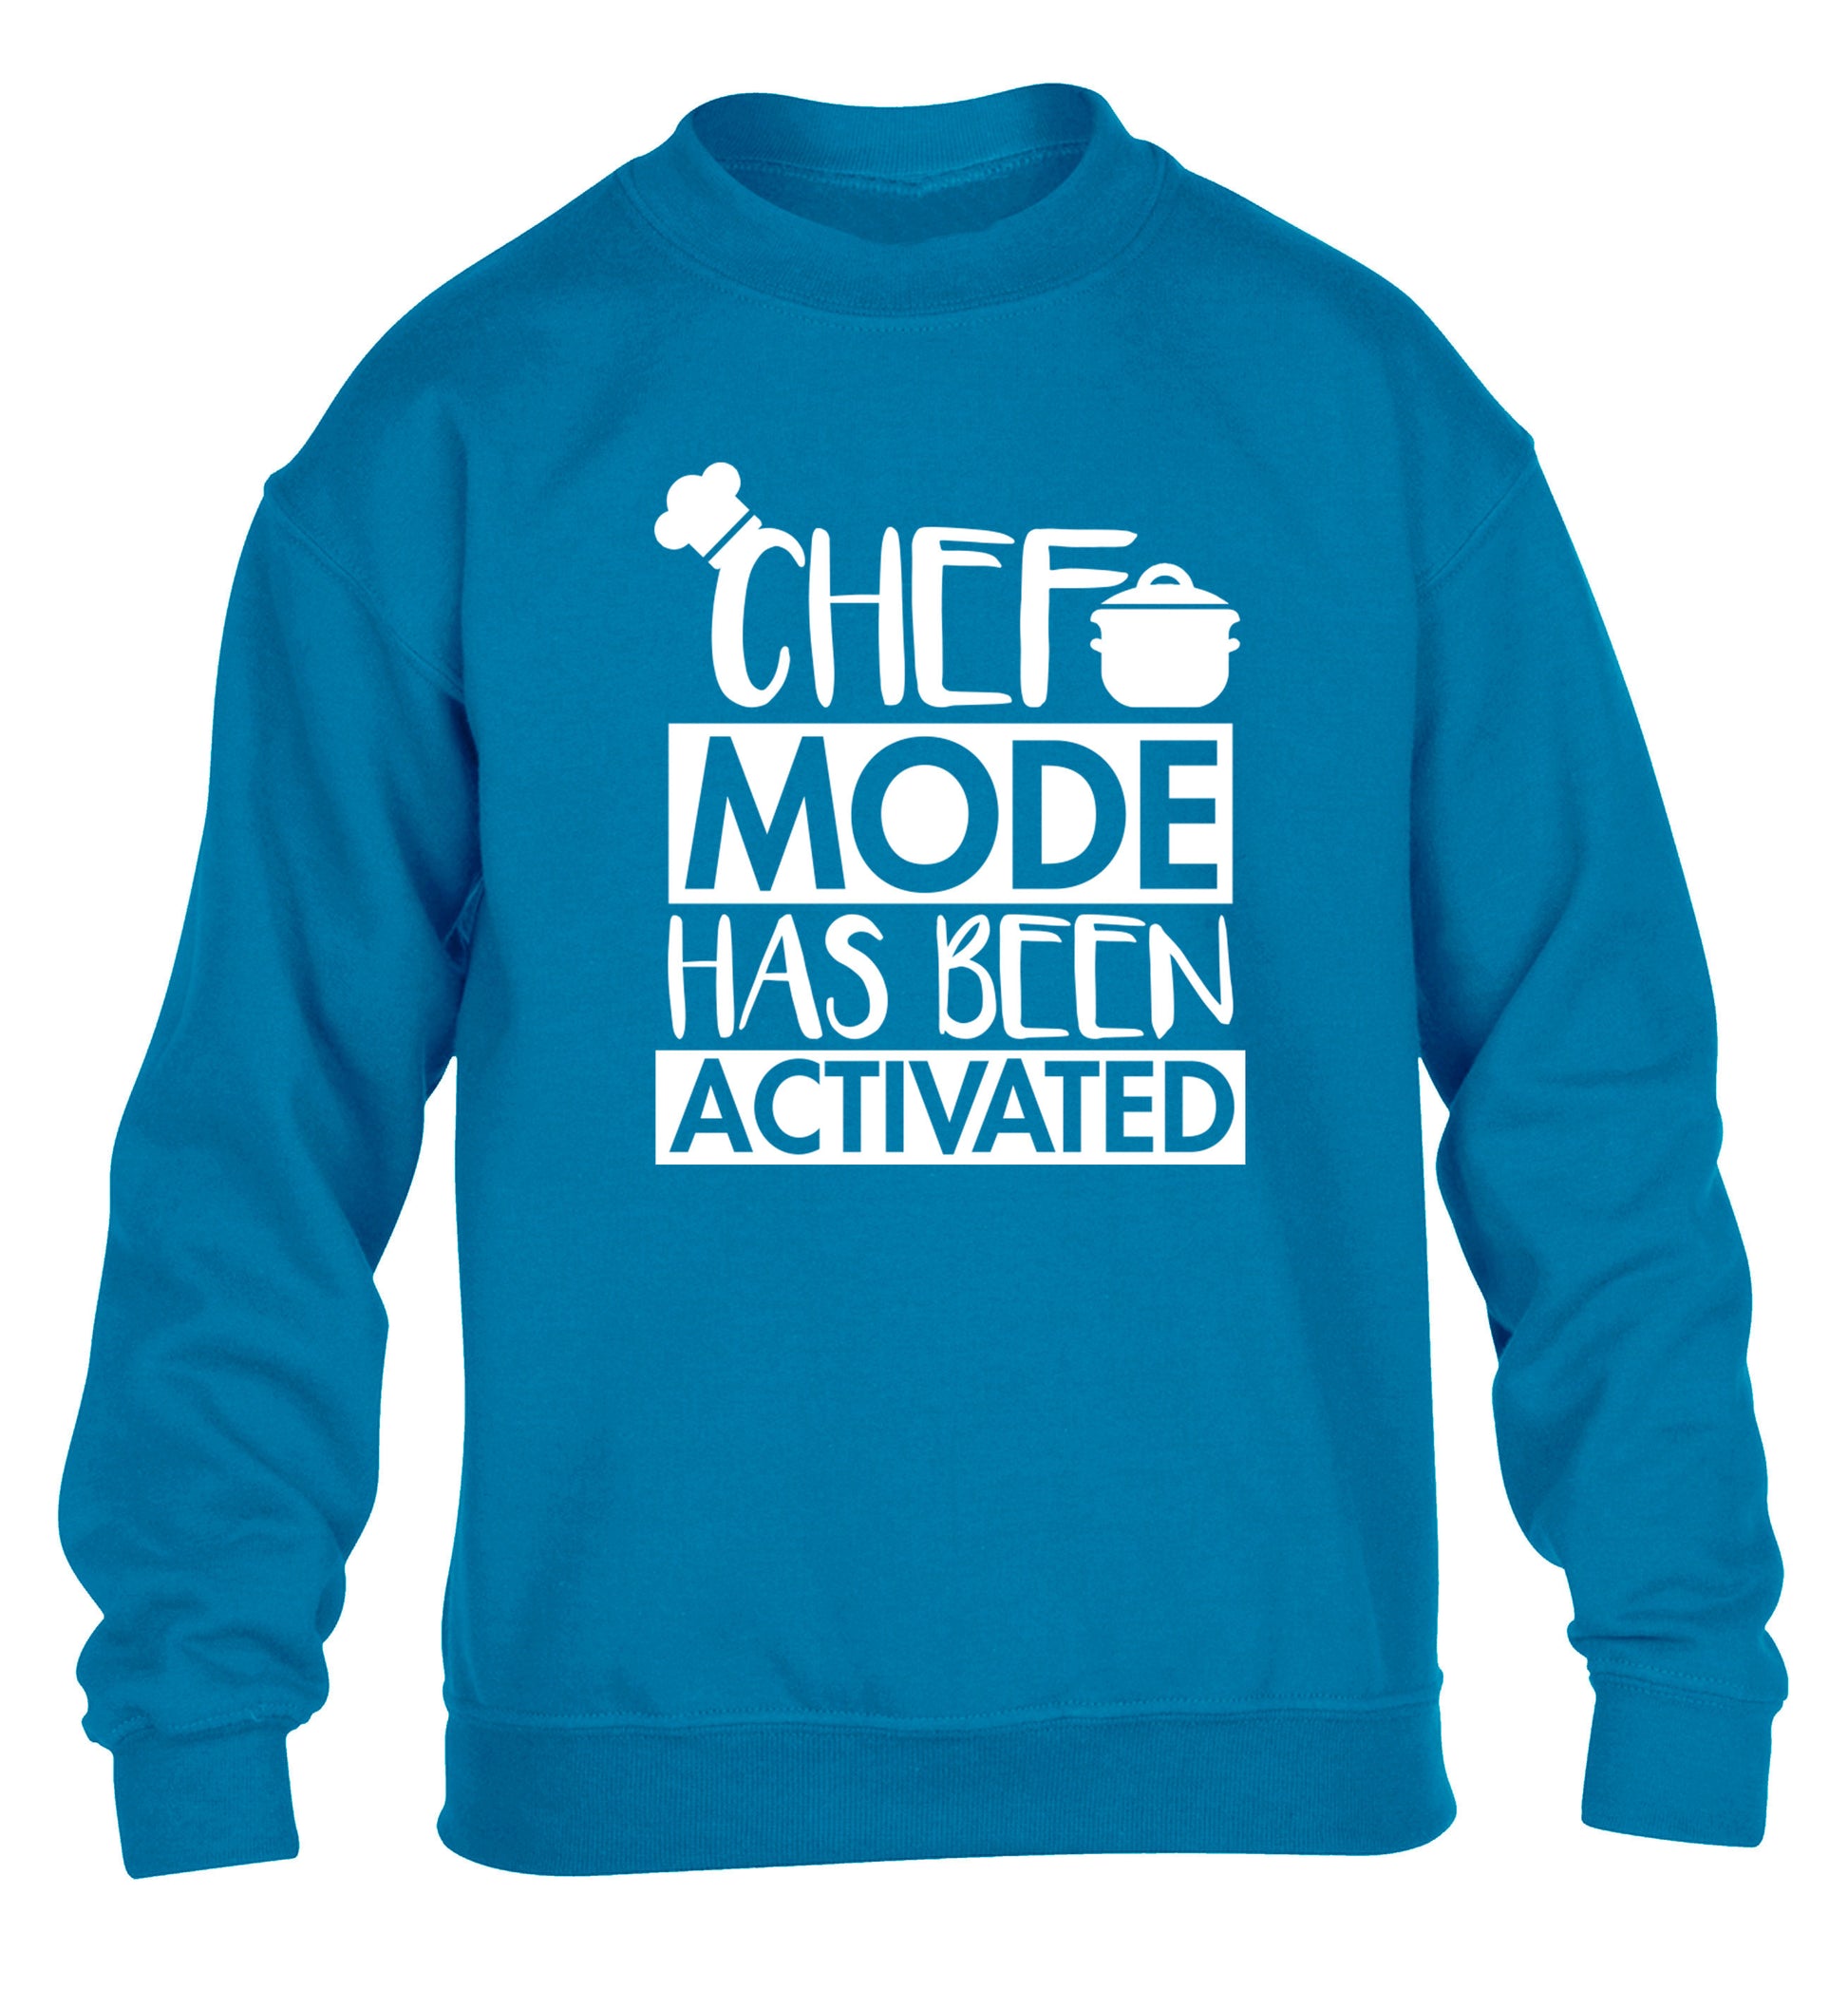 Chef mode has been activated children's blue sweater 12-14 Years